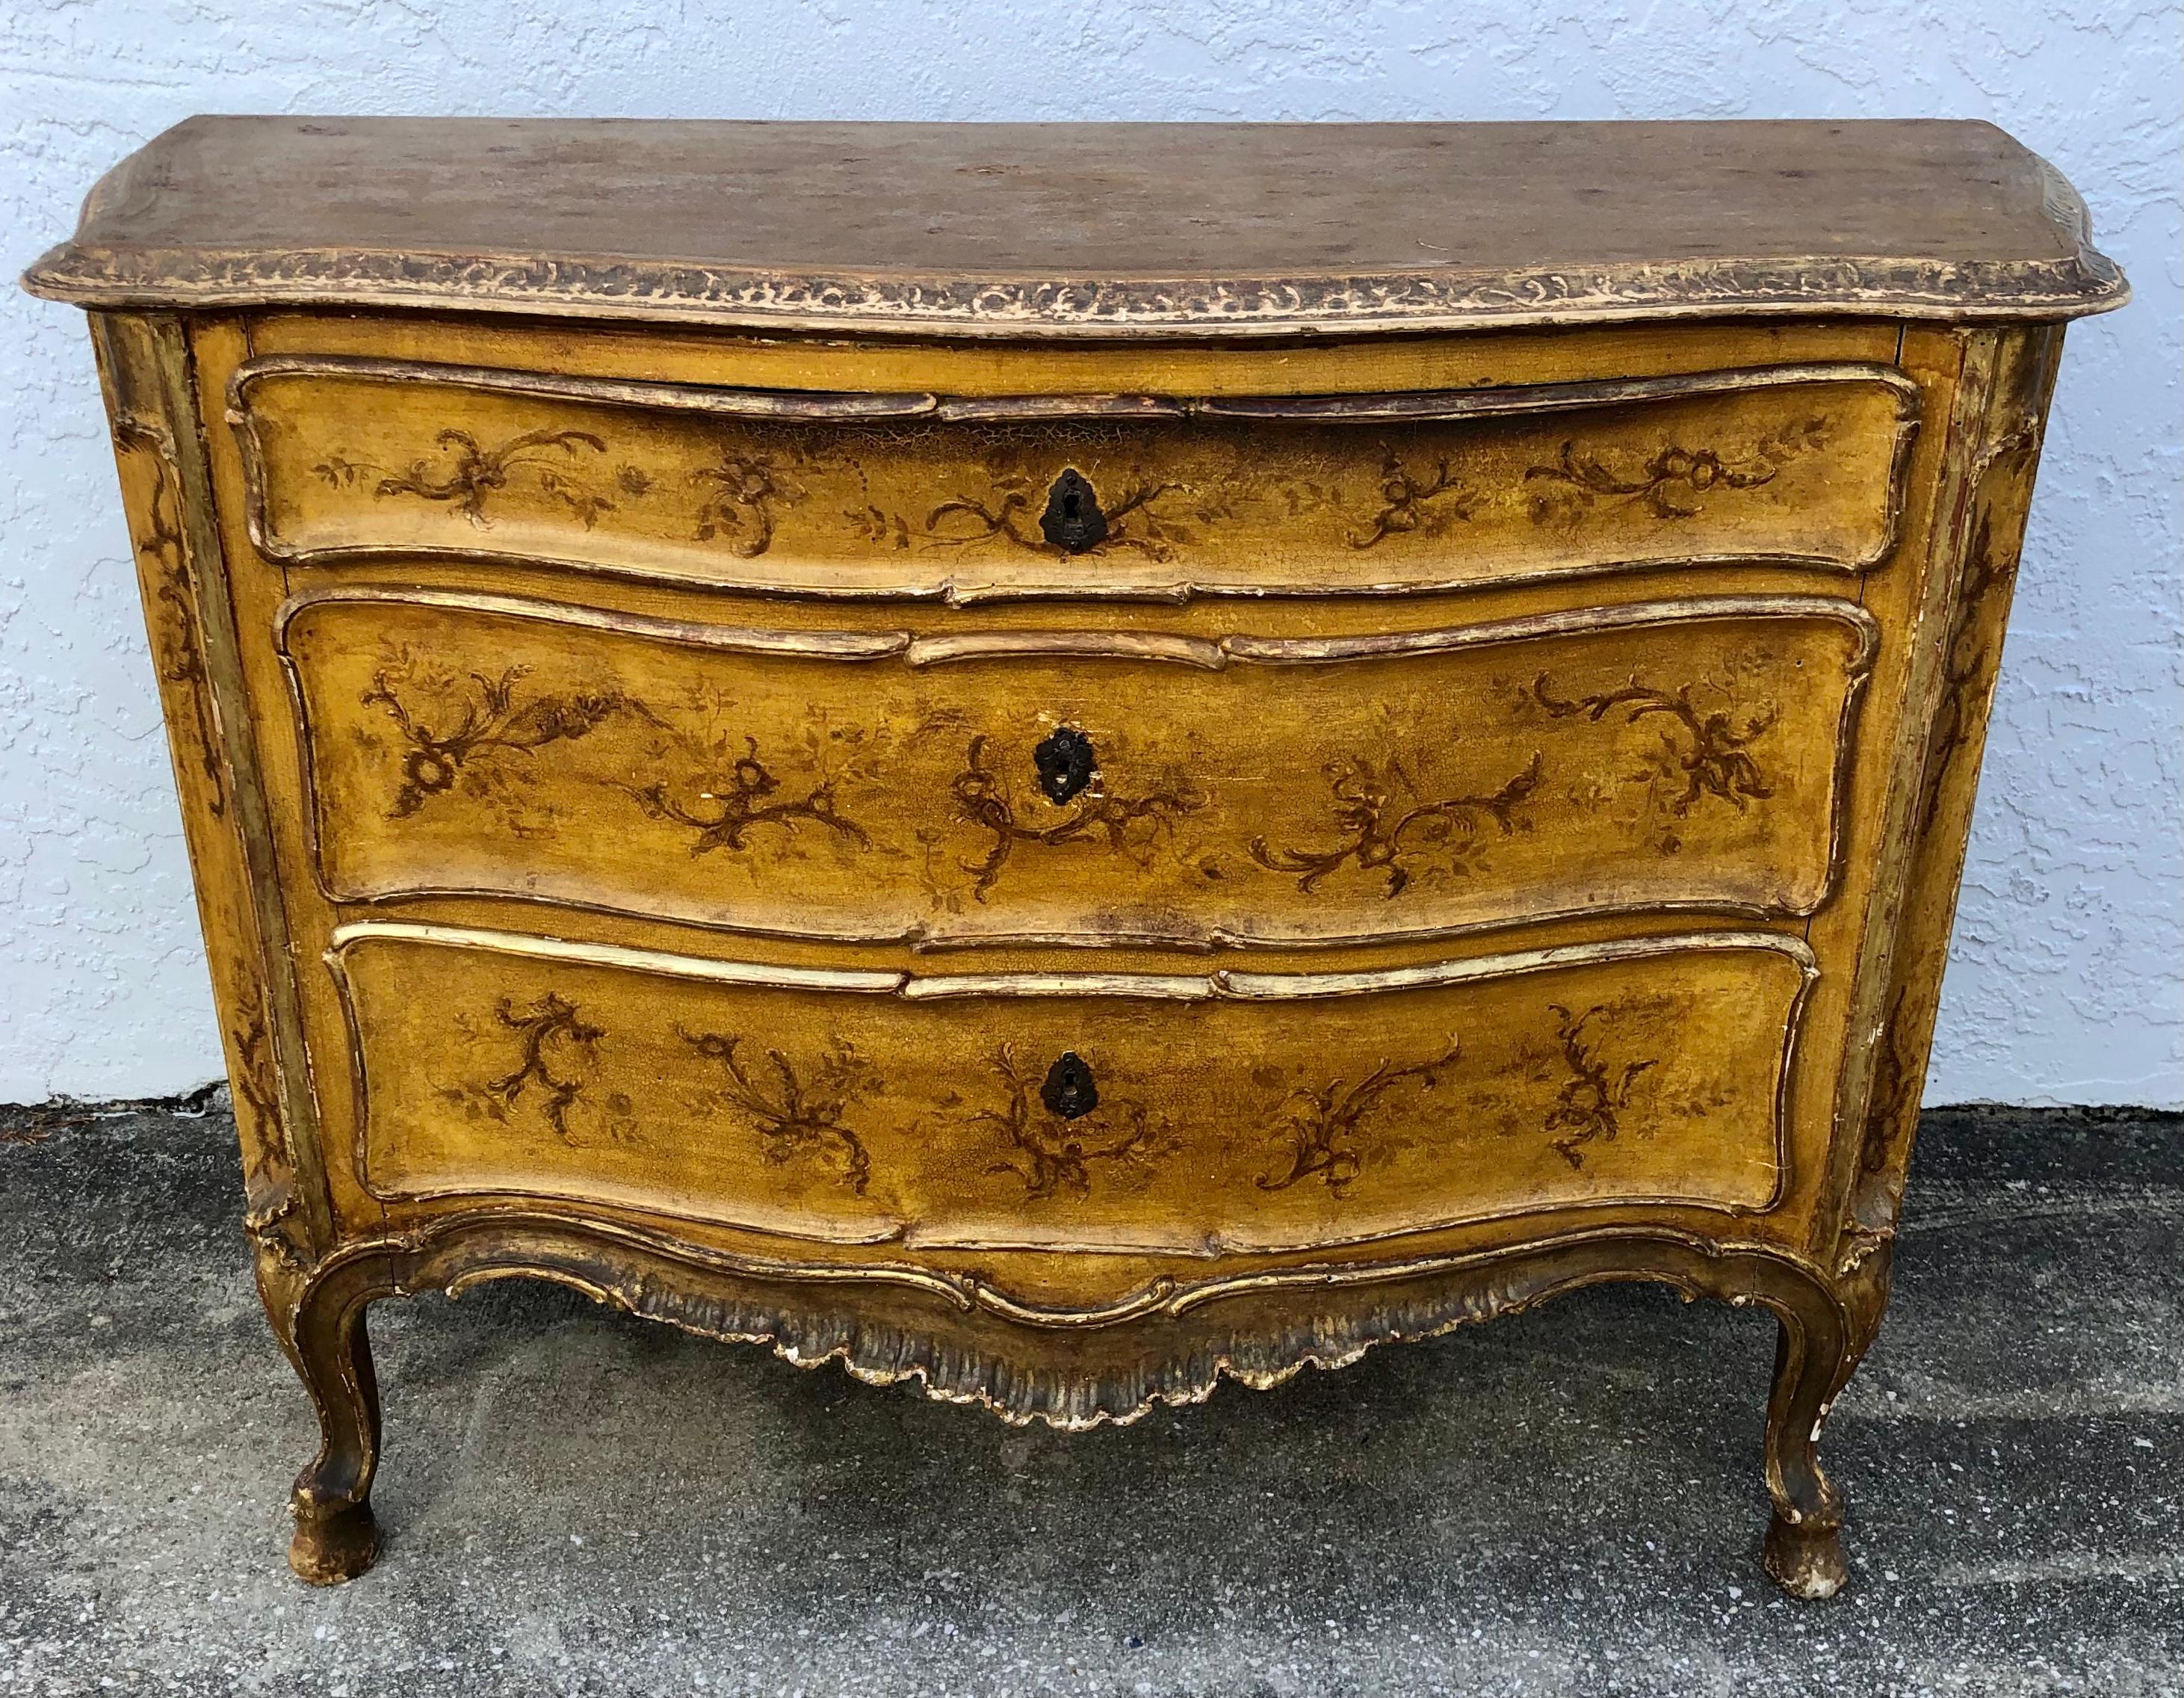 Superb Italian hand-painted three-drawer commode in the Rococo style with stunning decoration in the manner of 18th century Venetian furniture. Please look at the detail photos of this amazing chest, painted and gilt by a master artist in Italy.